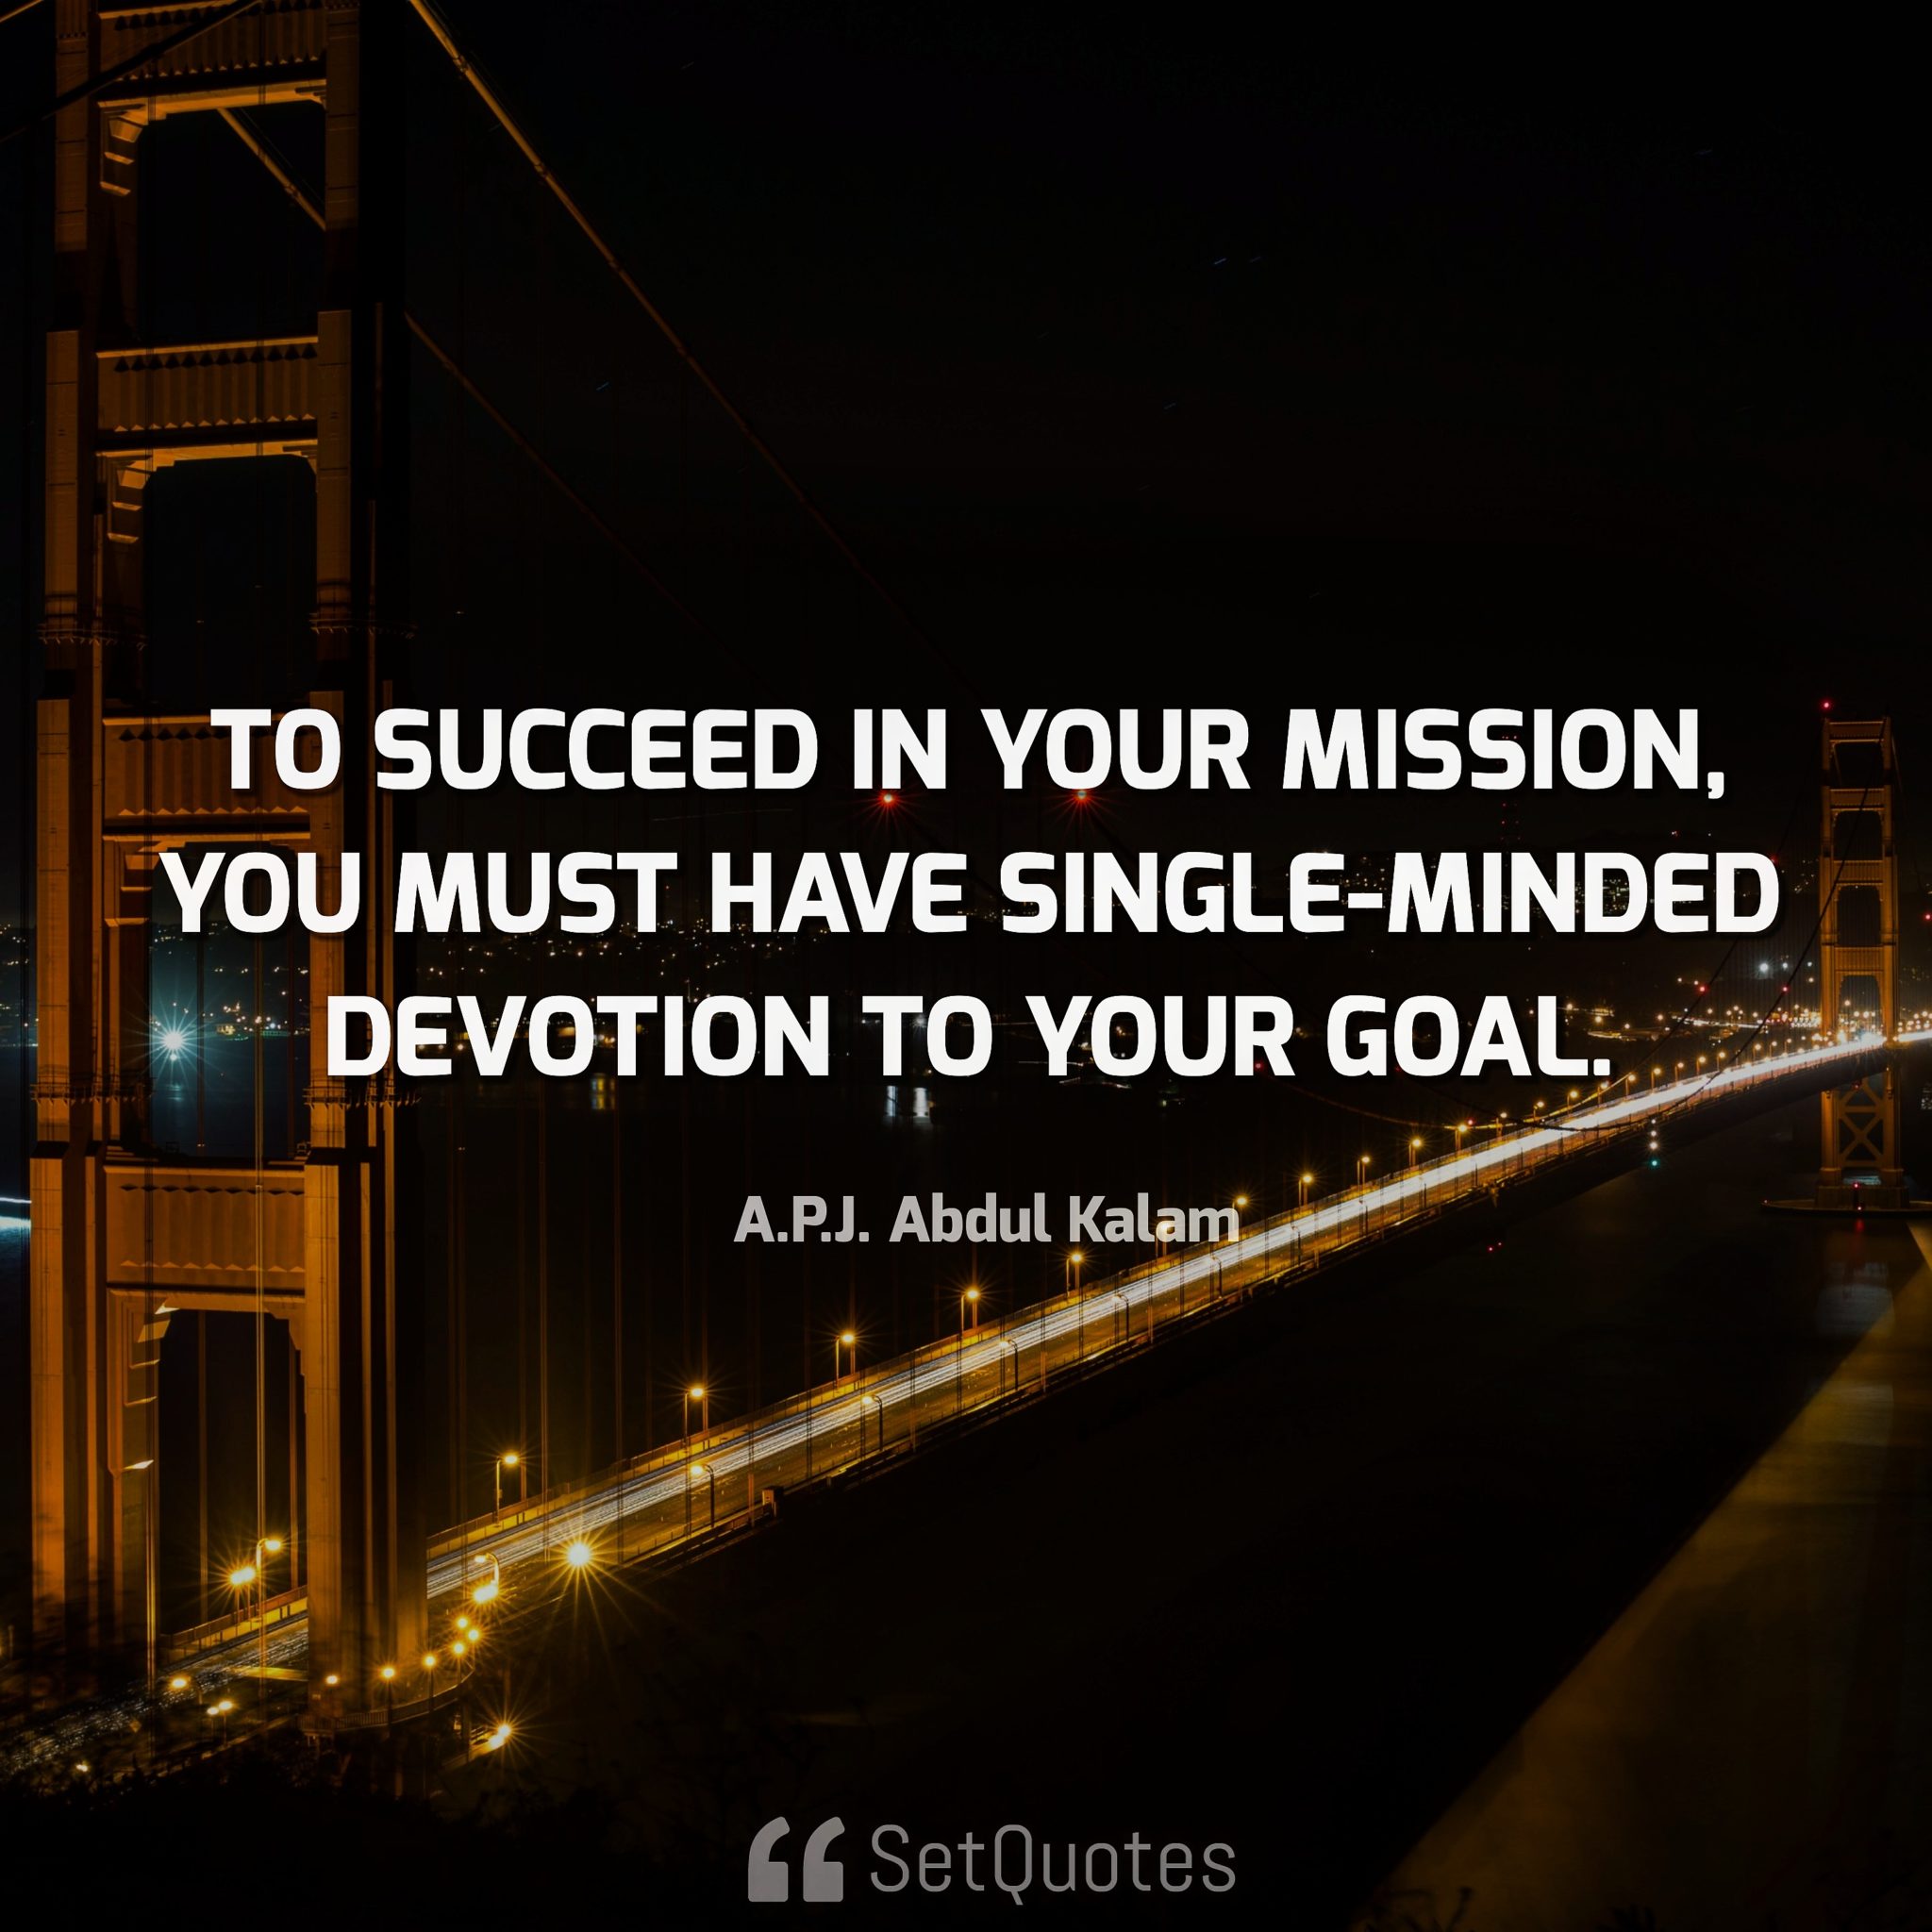 To succeed in your mission, you must have single-minded devotion to your goal. - A. P. J. Abdul Kalam quotes from SetQuotes.com